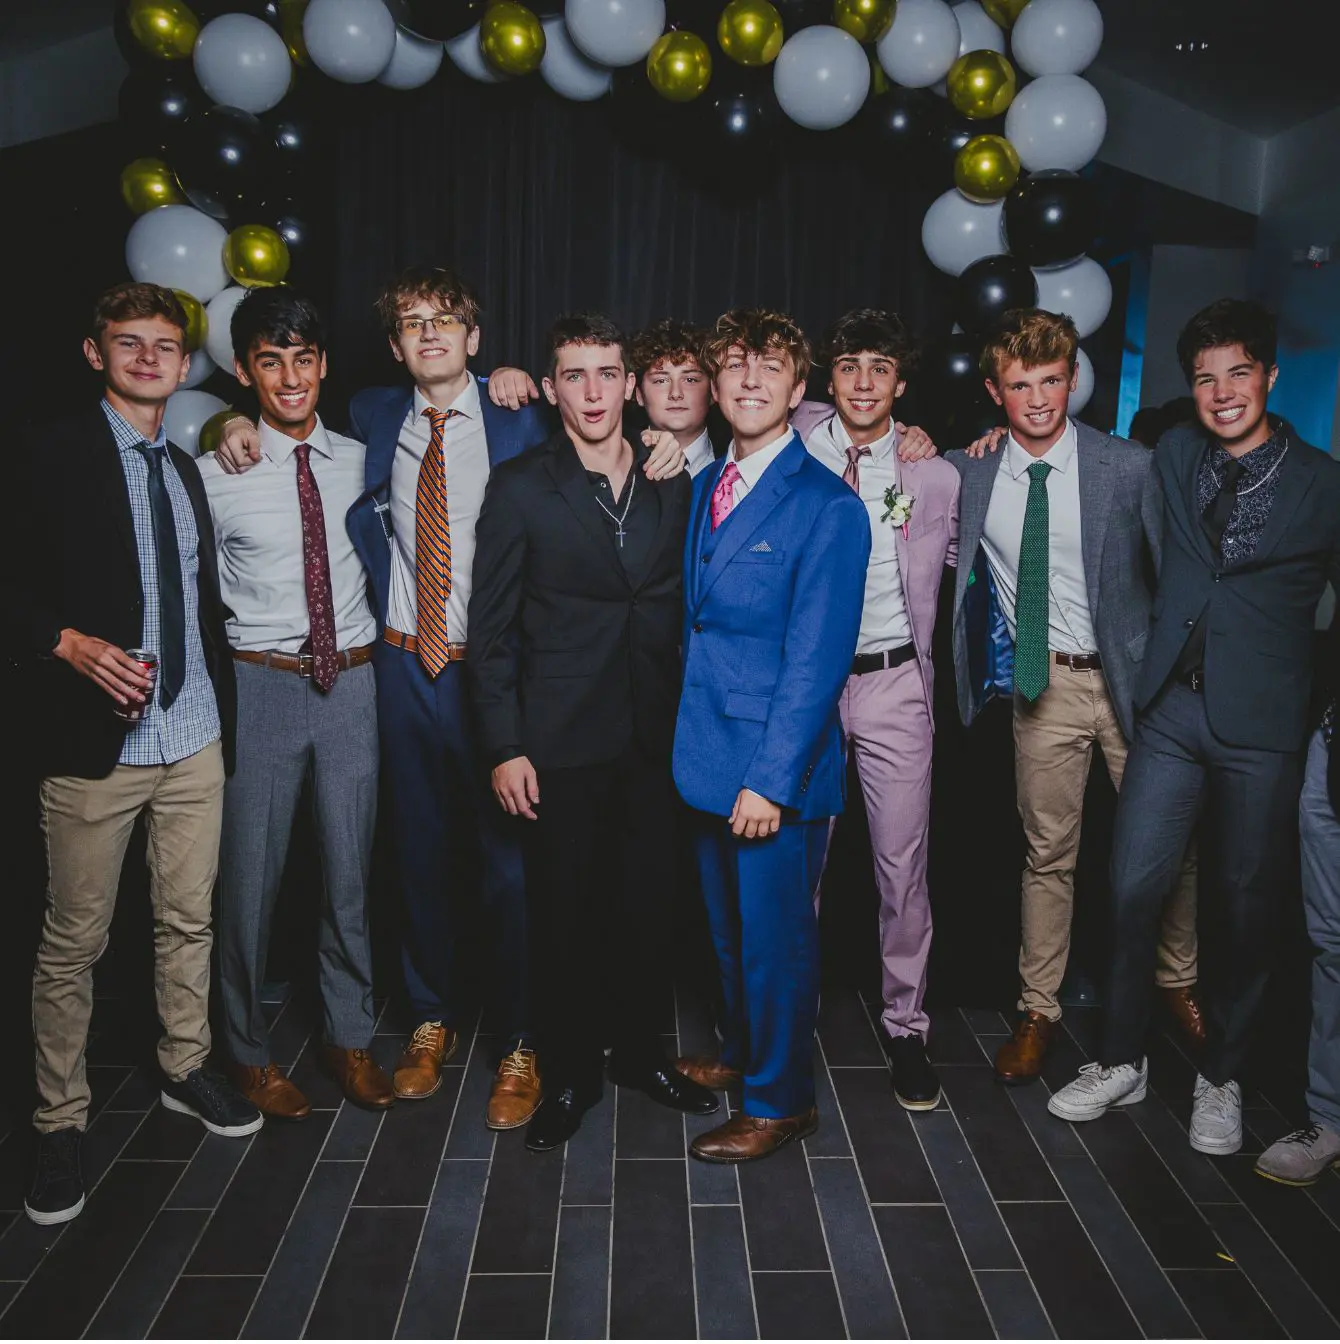 A group of Trinity high school boys in semi-formal attire posing confidently at a school event, with a backdrop of black, white, and gold balloons, radiating youthful camaraderie and celebration.